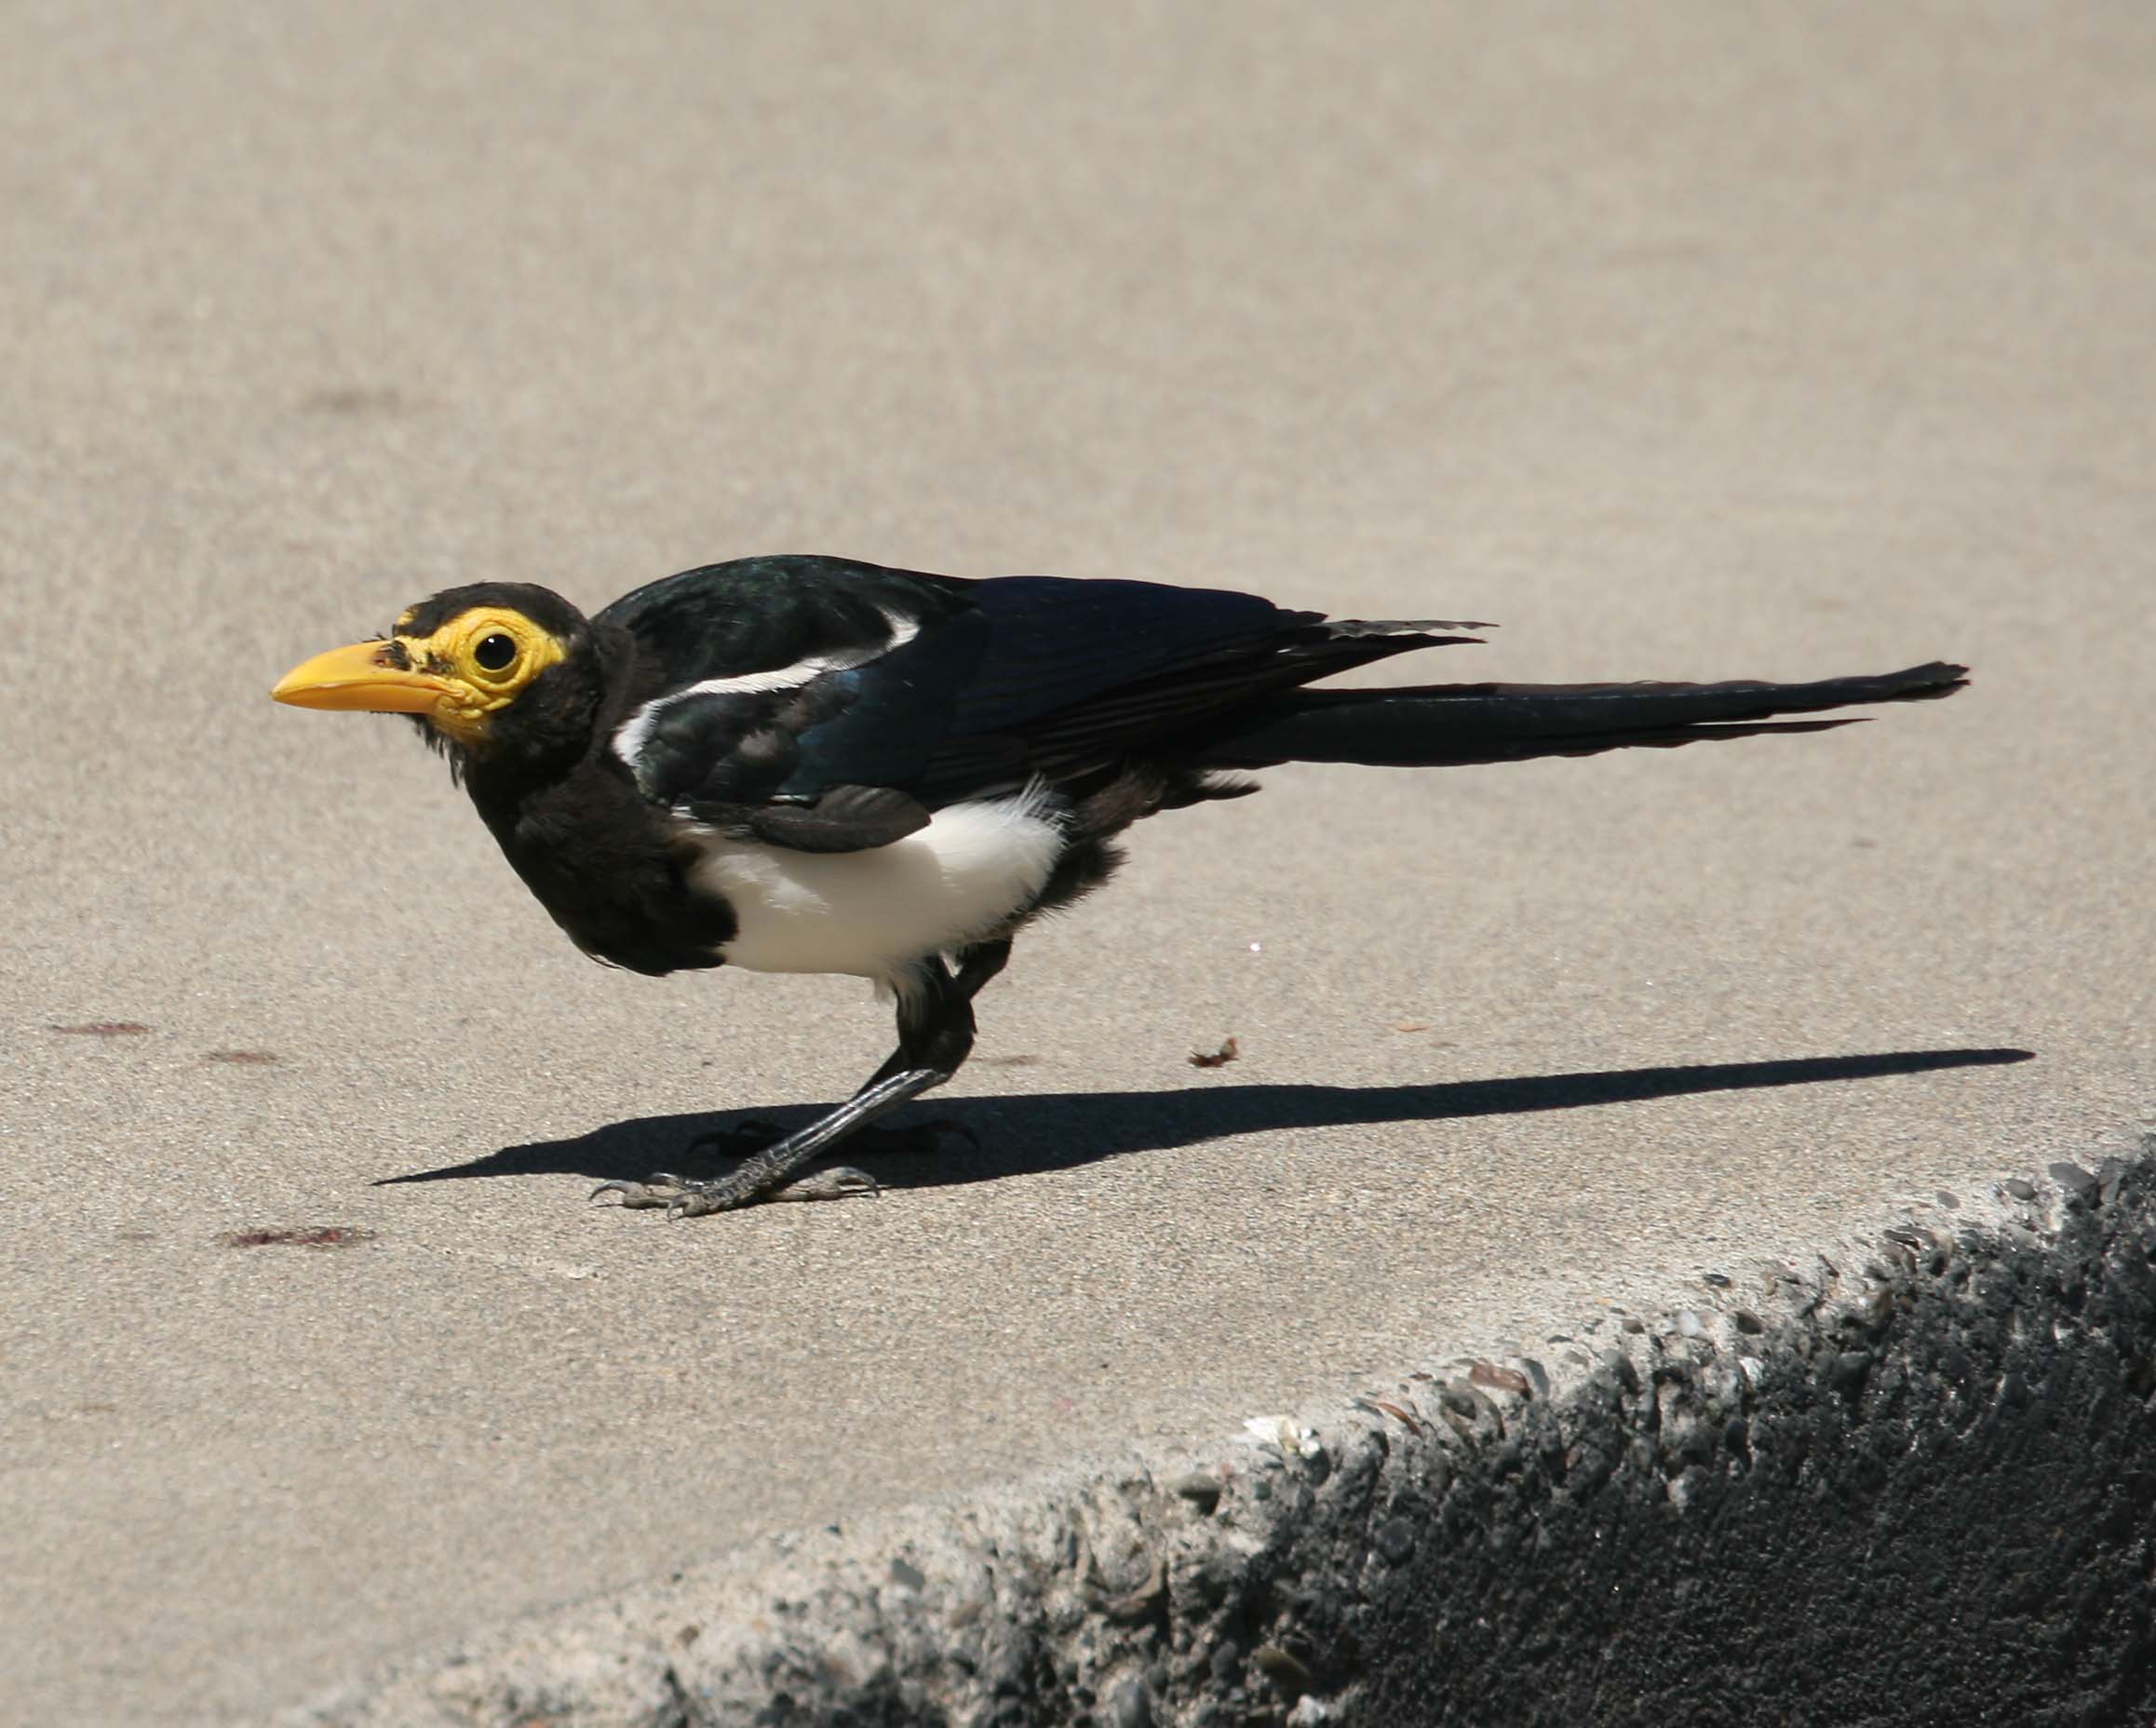 Image of Yellow-billed Magpie